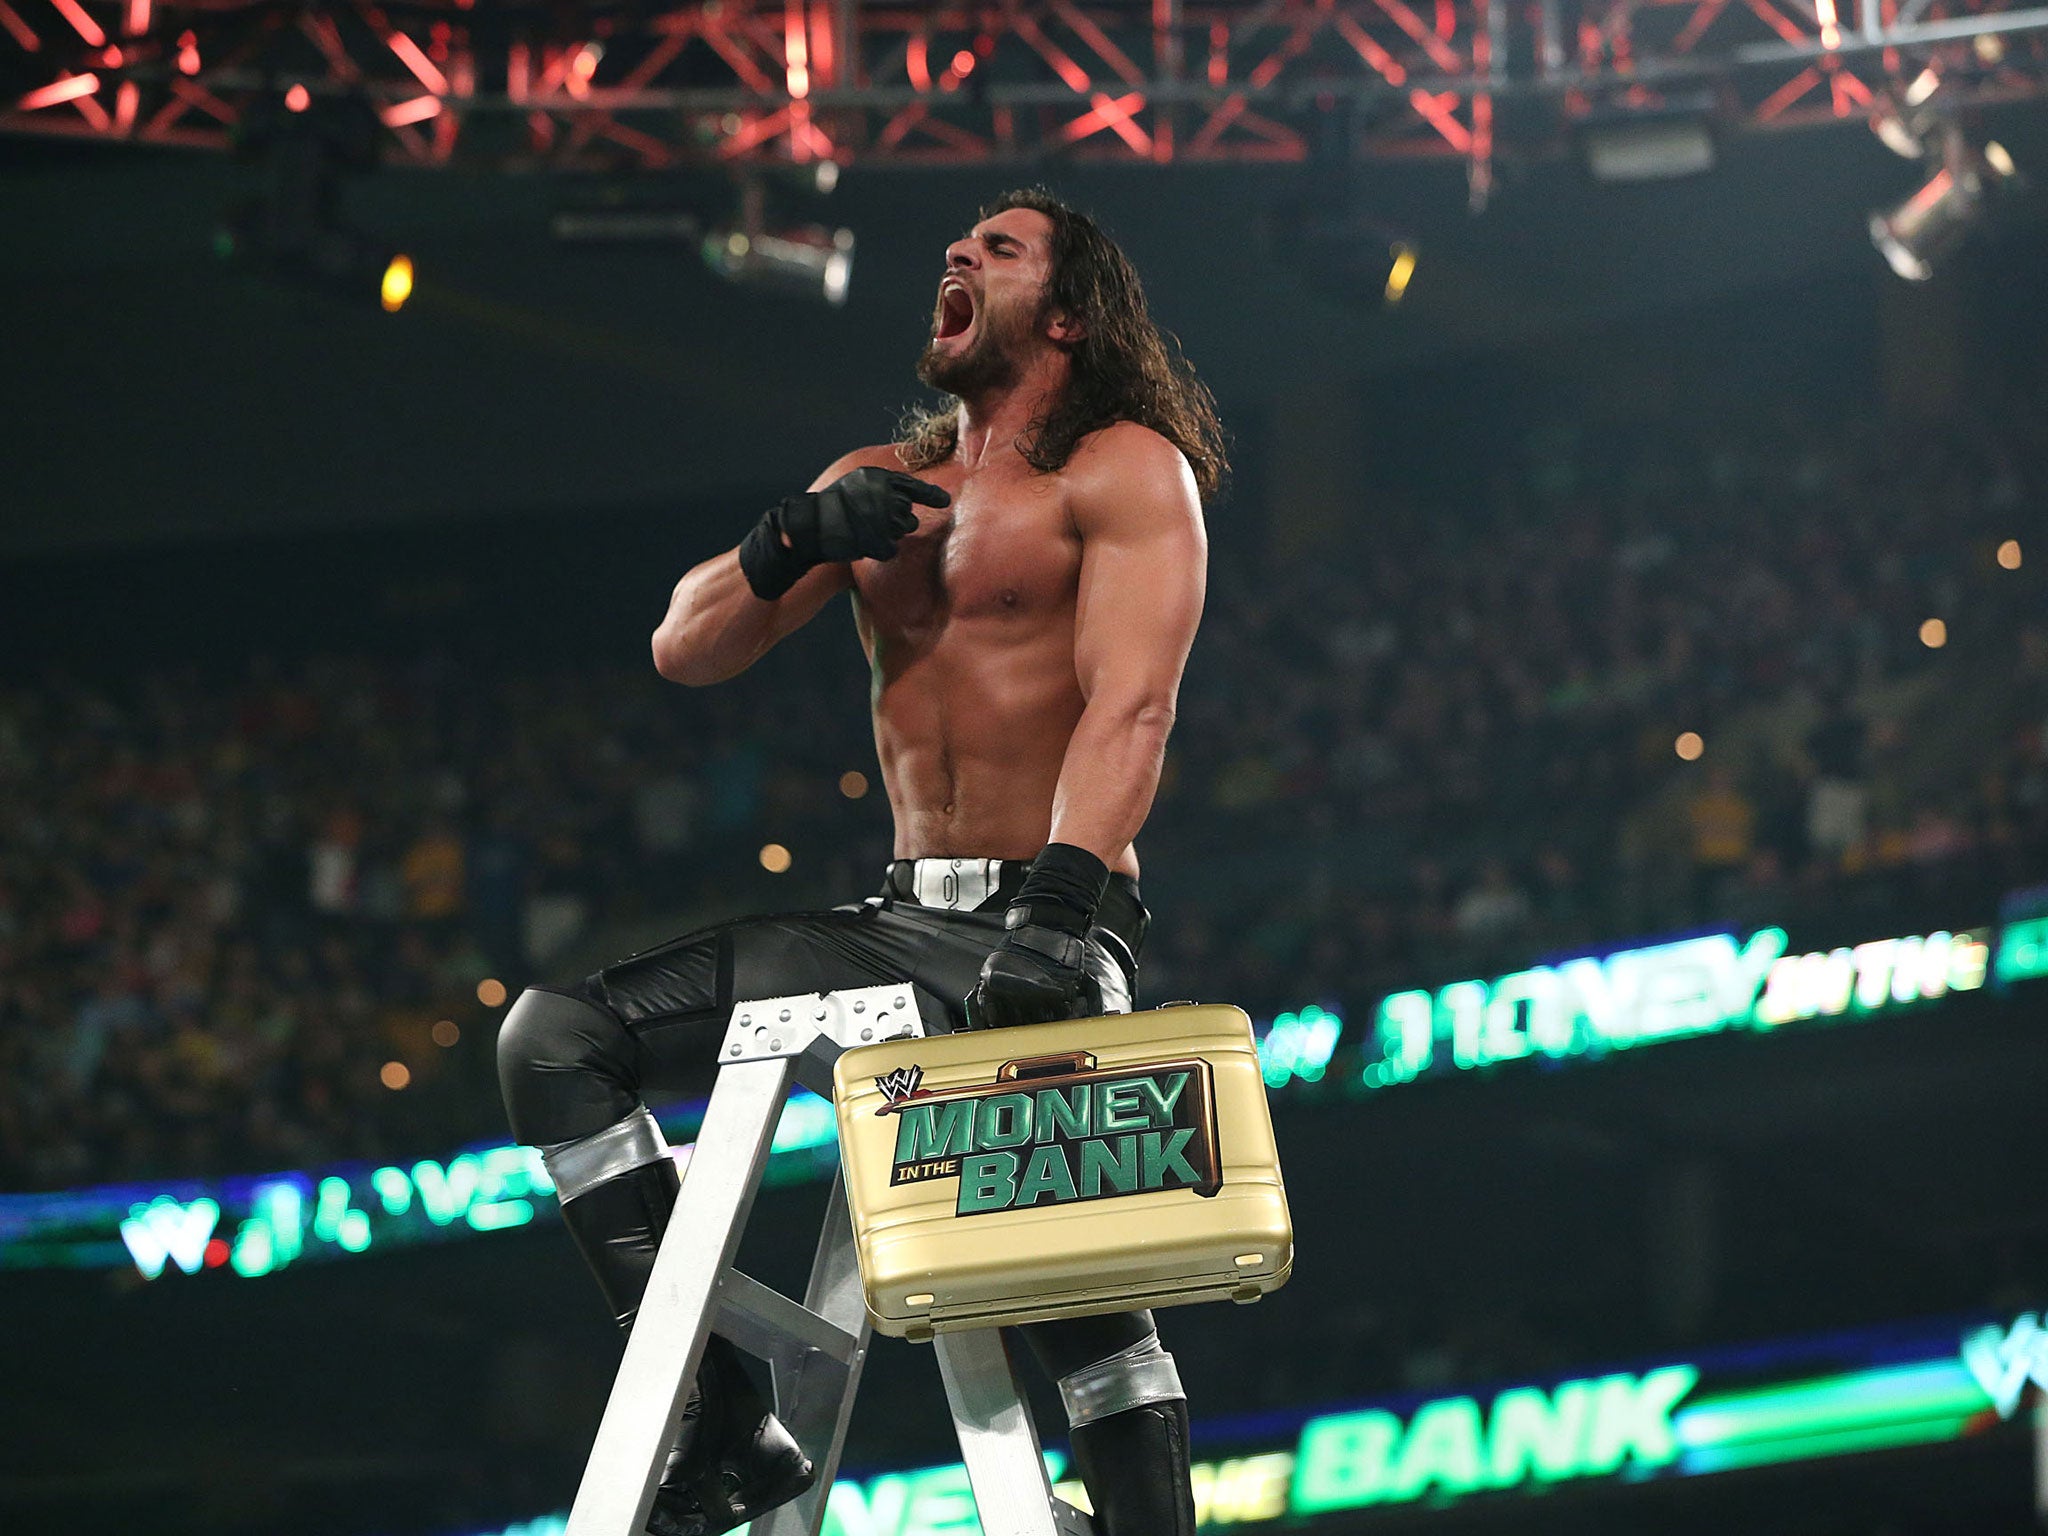 Rollins' biggest accolade to date was his victory at Money in the Bank